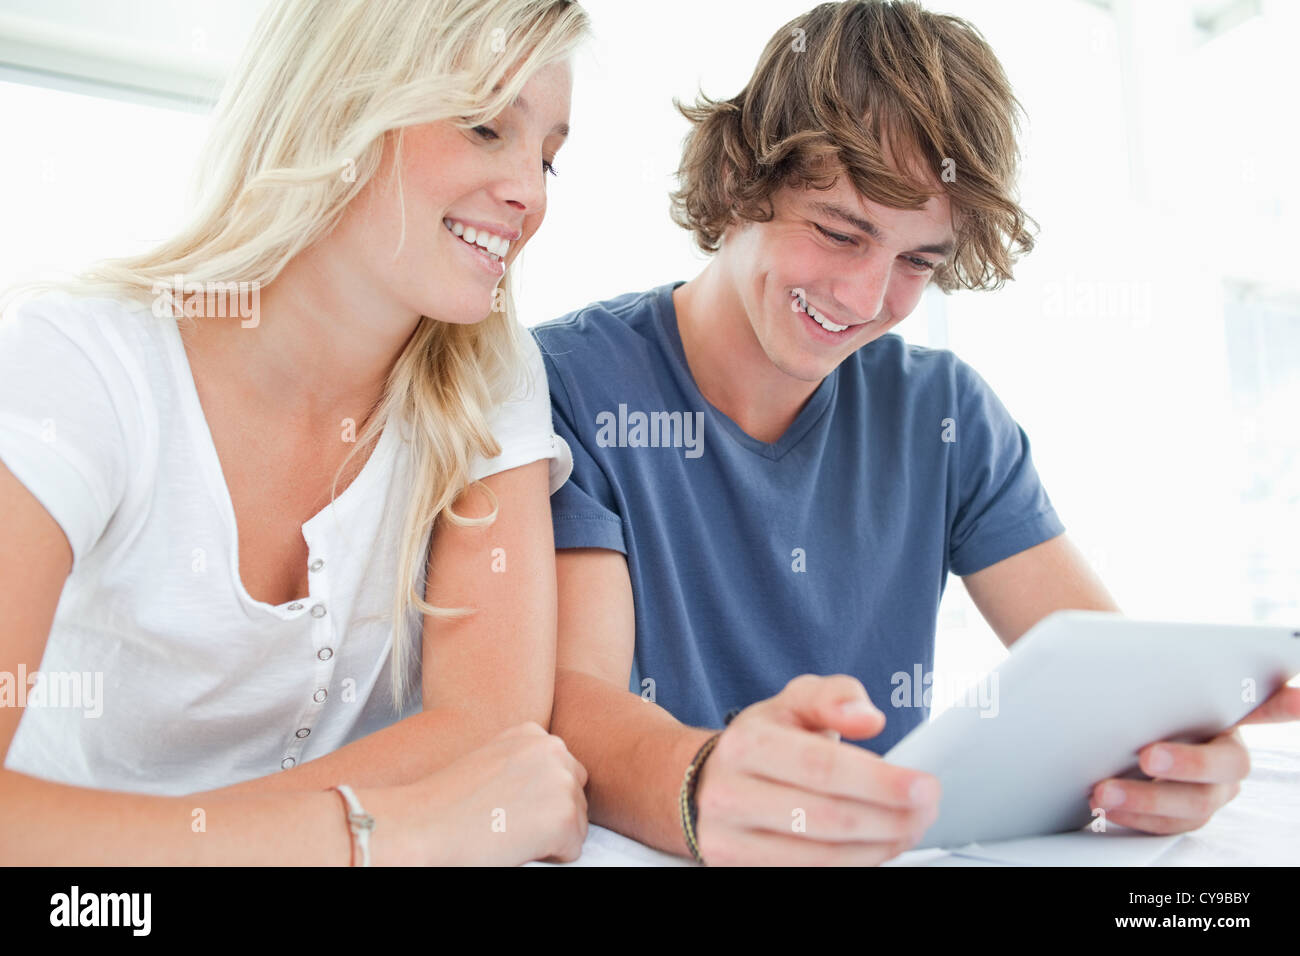 A smiling couple using a tablet together Banque D'Images